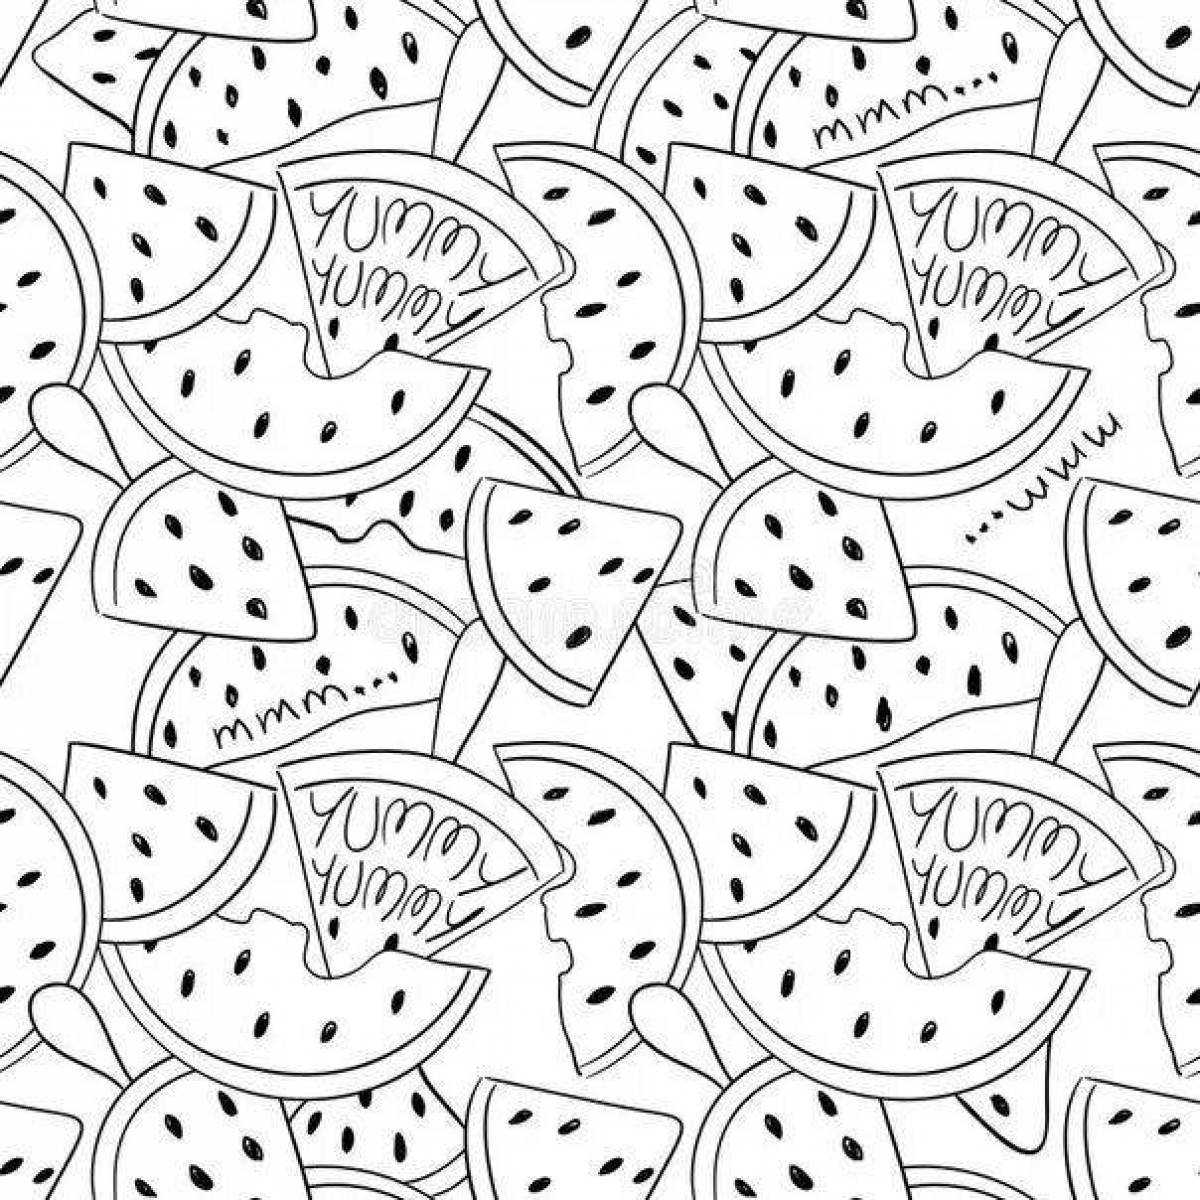 Coloring page wallpaper for phone